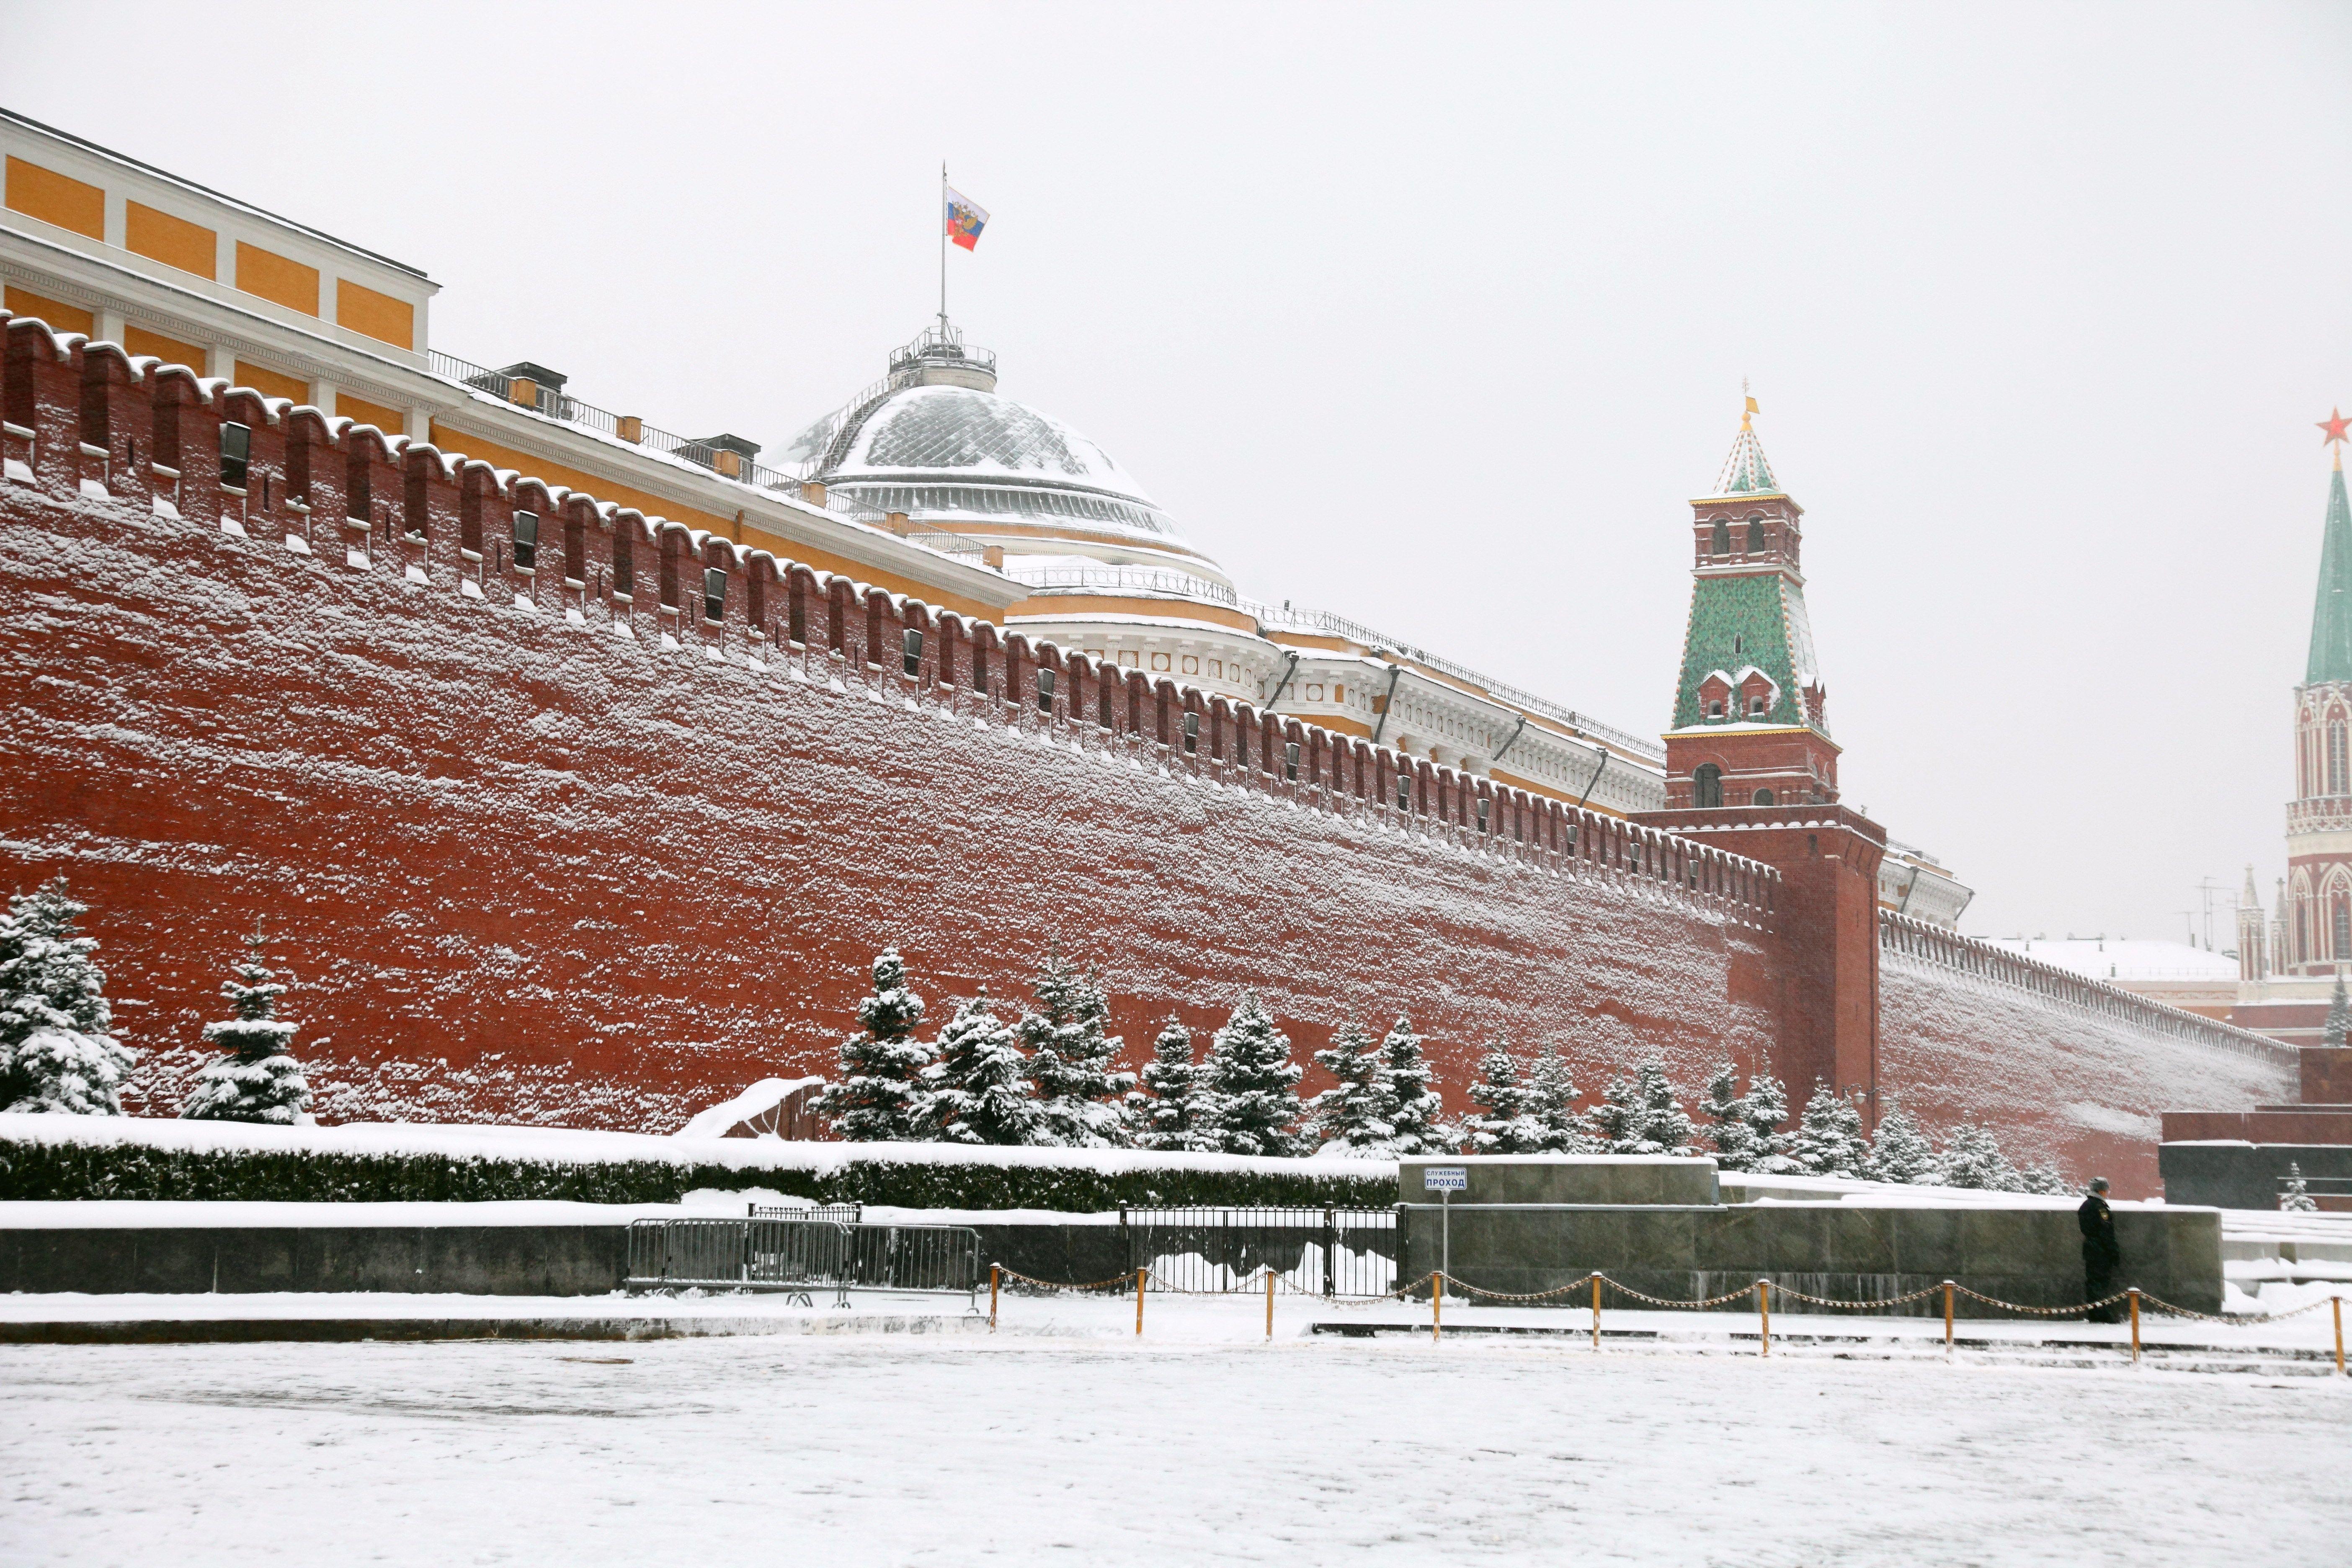 Snow in Moscow Kremlin wallpaper and image